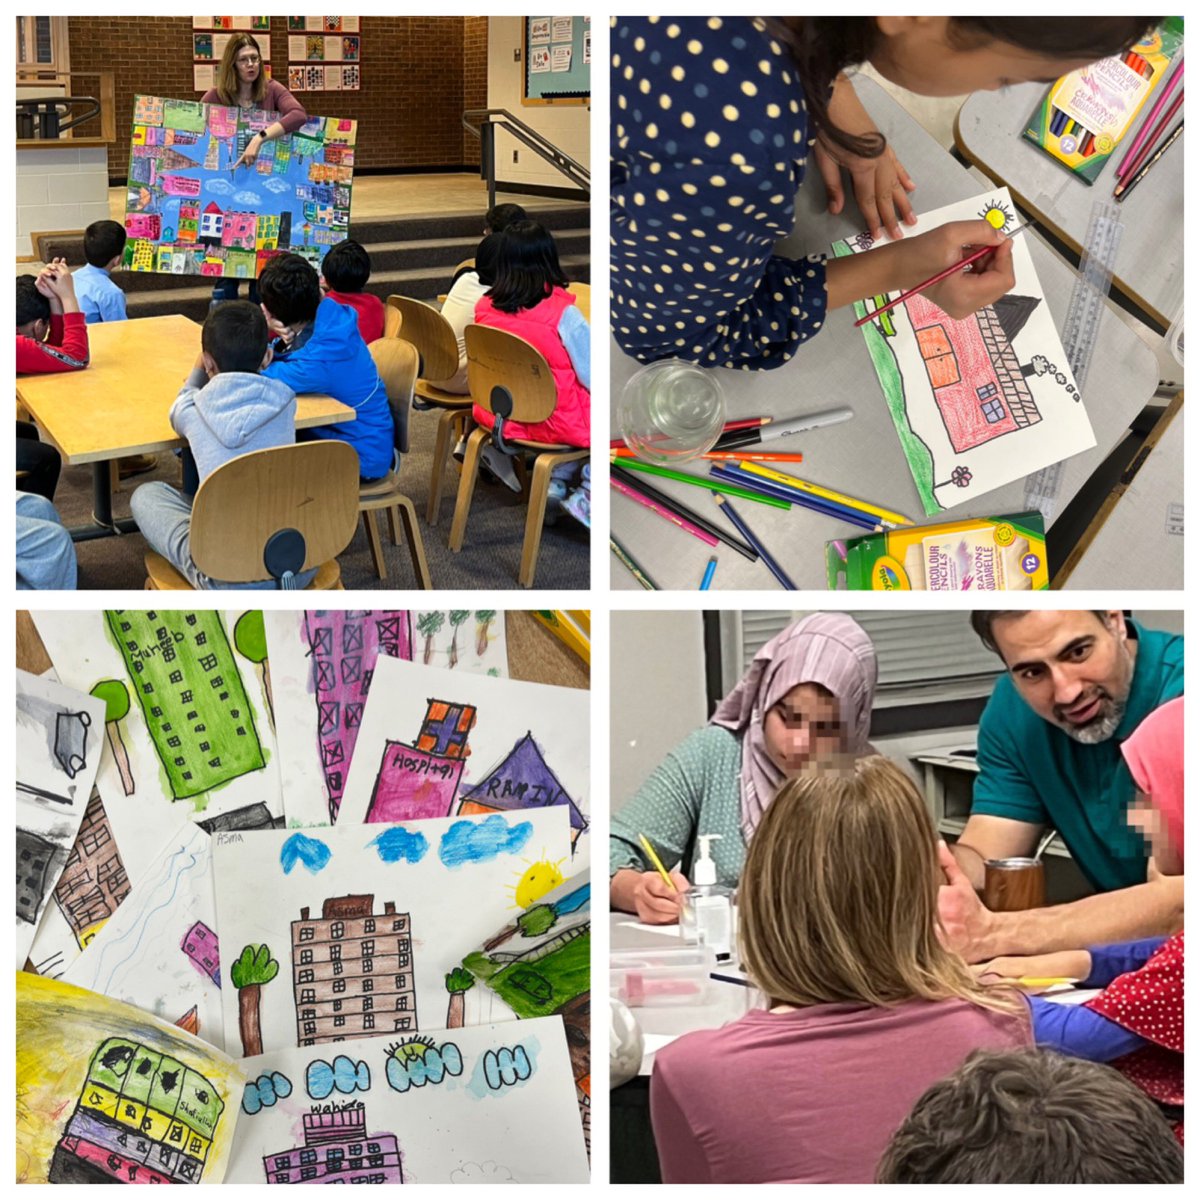 Connecting newcomer students to their school & community, @welcome_tdsb arts-based mentoring program helps Gateway students feel engaged & at ease. The day was filled with creativity & wonder! @tdsb @LN10Alvarez @LC2_TDSB @frajwani @mikkihymus @schan_tdsb @TDSB_CS